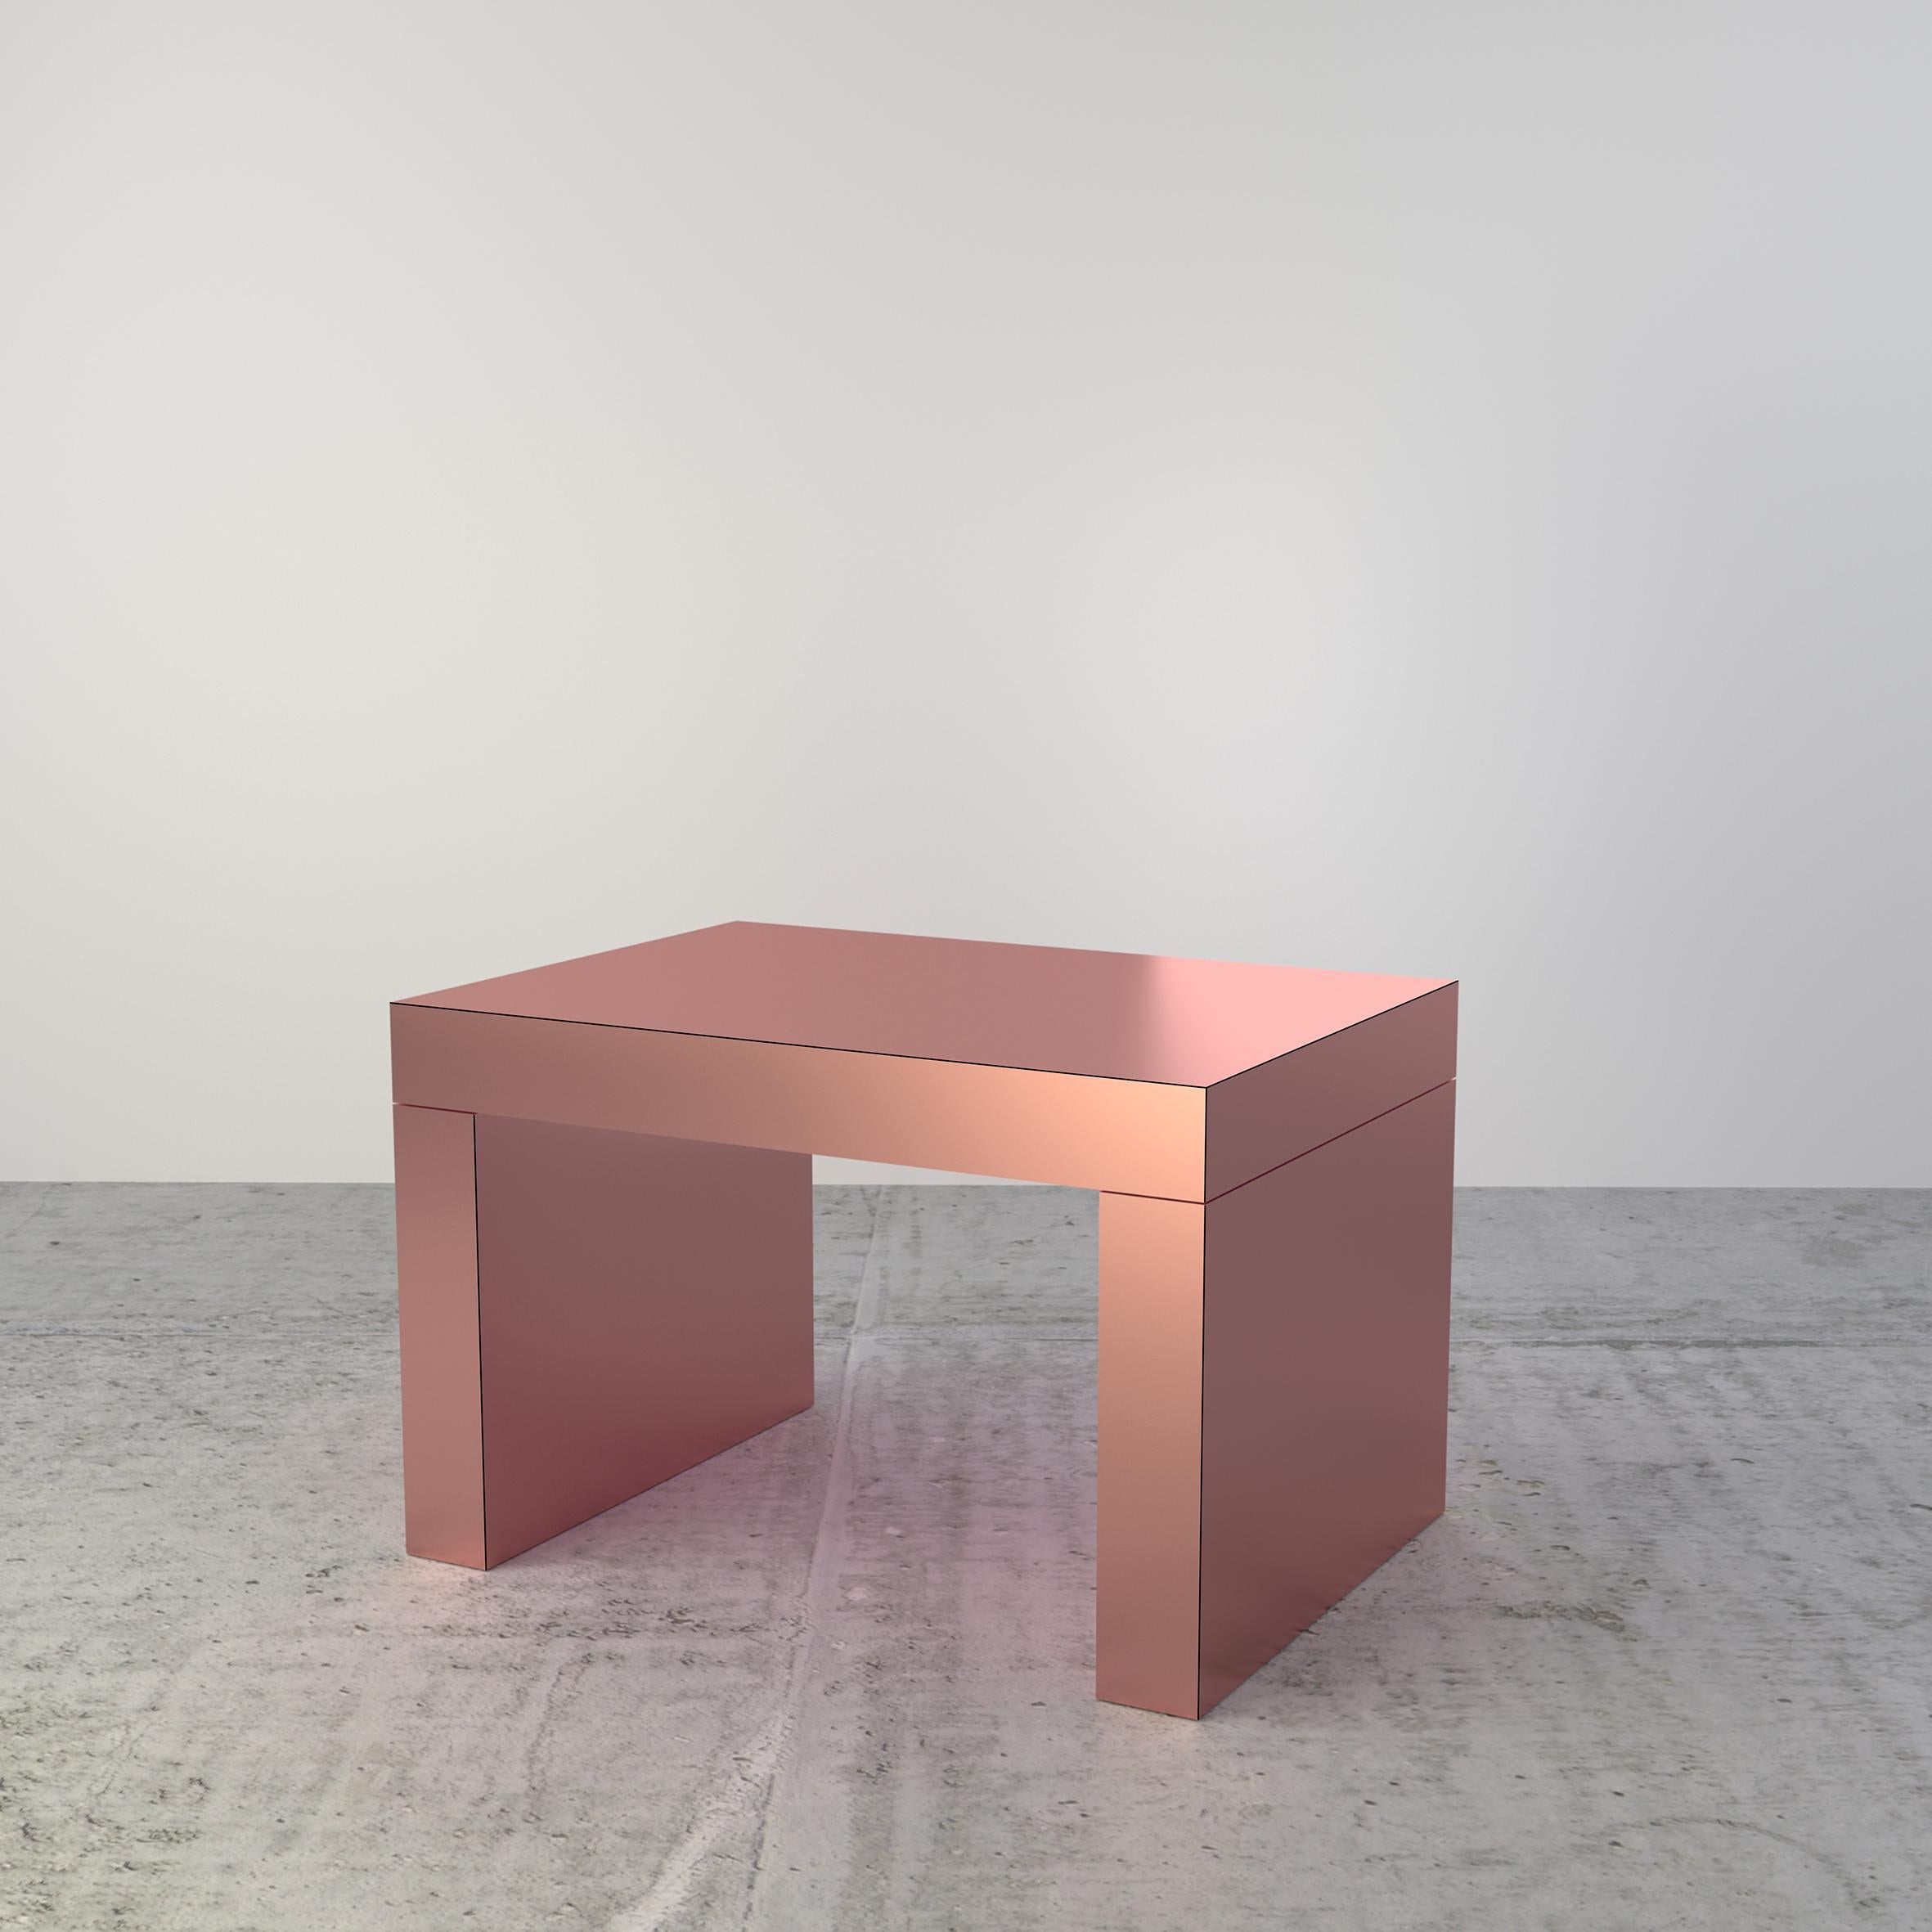 Gaby is a multifunctional coffee table entirely covered by HPL aluminum. The manufacturing process and research on metal surfaces treatment and finishing allows to highlight the shine and brightness of aluminum.

Gaby is entirely handcrafted in